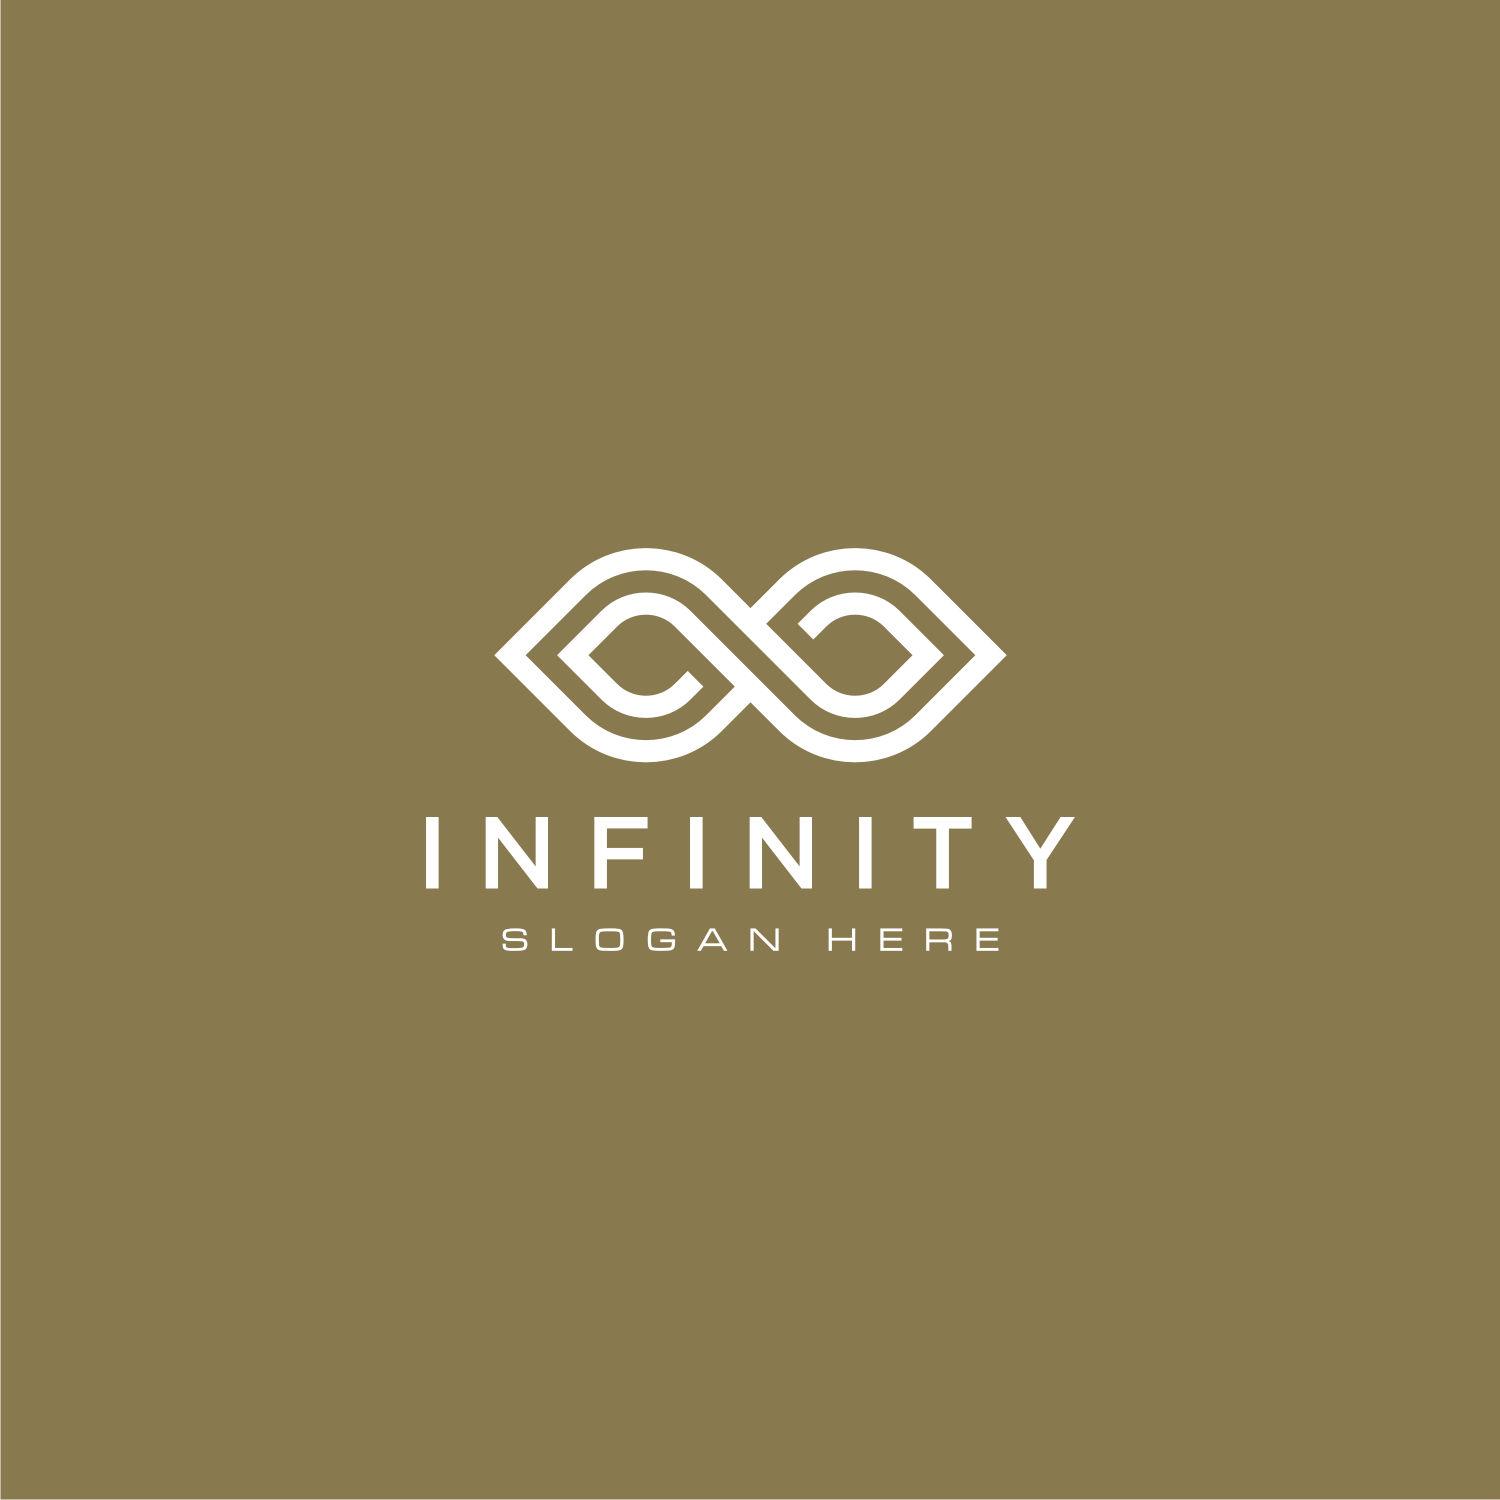 Infinity Loop With Line Art Style Symbol Preview Image.